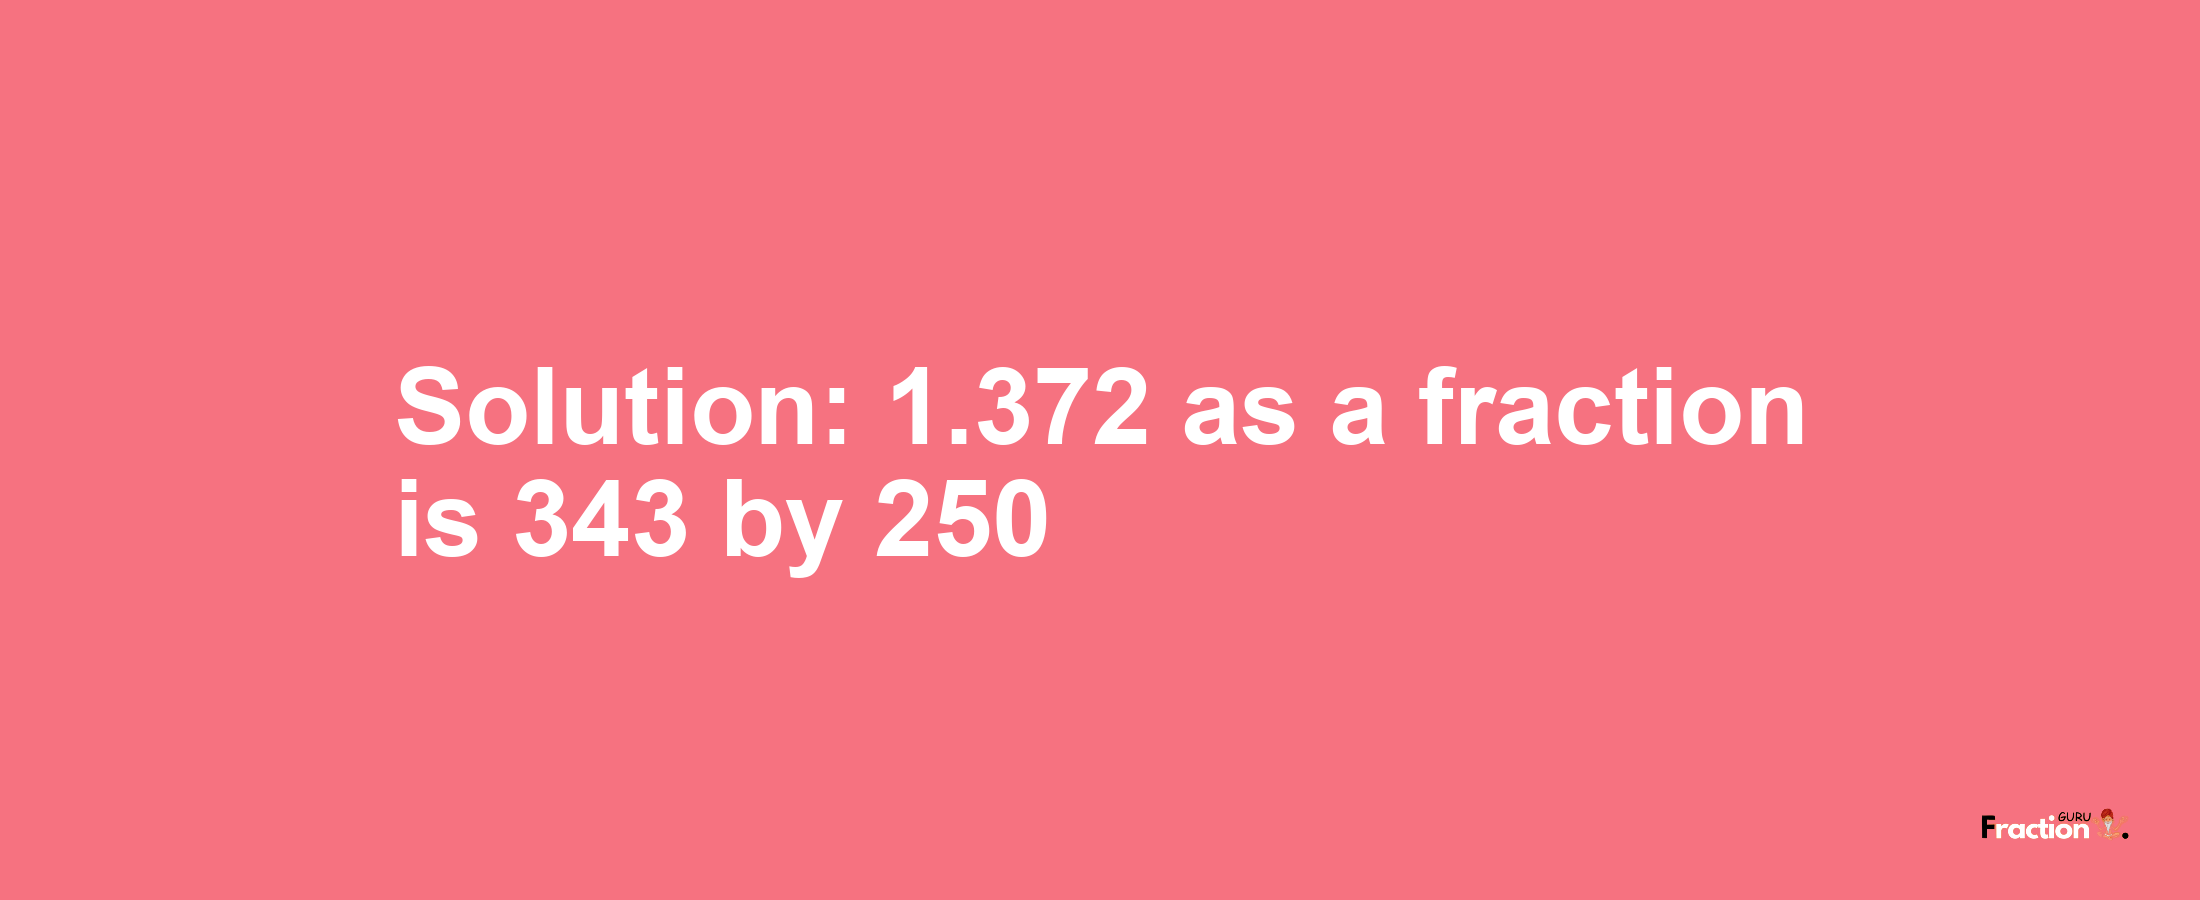 Solution:1.372 as a fraction is 343/250